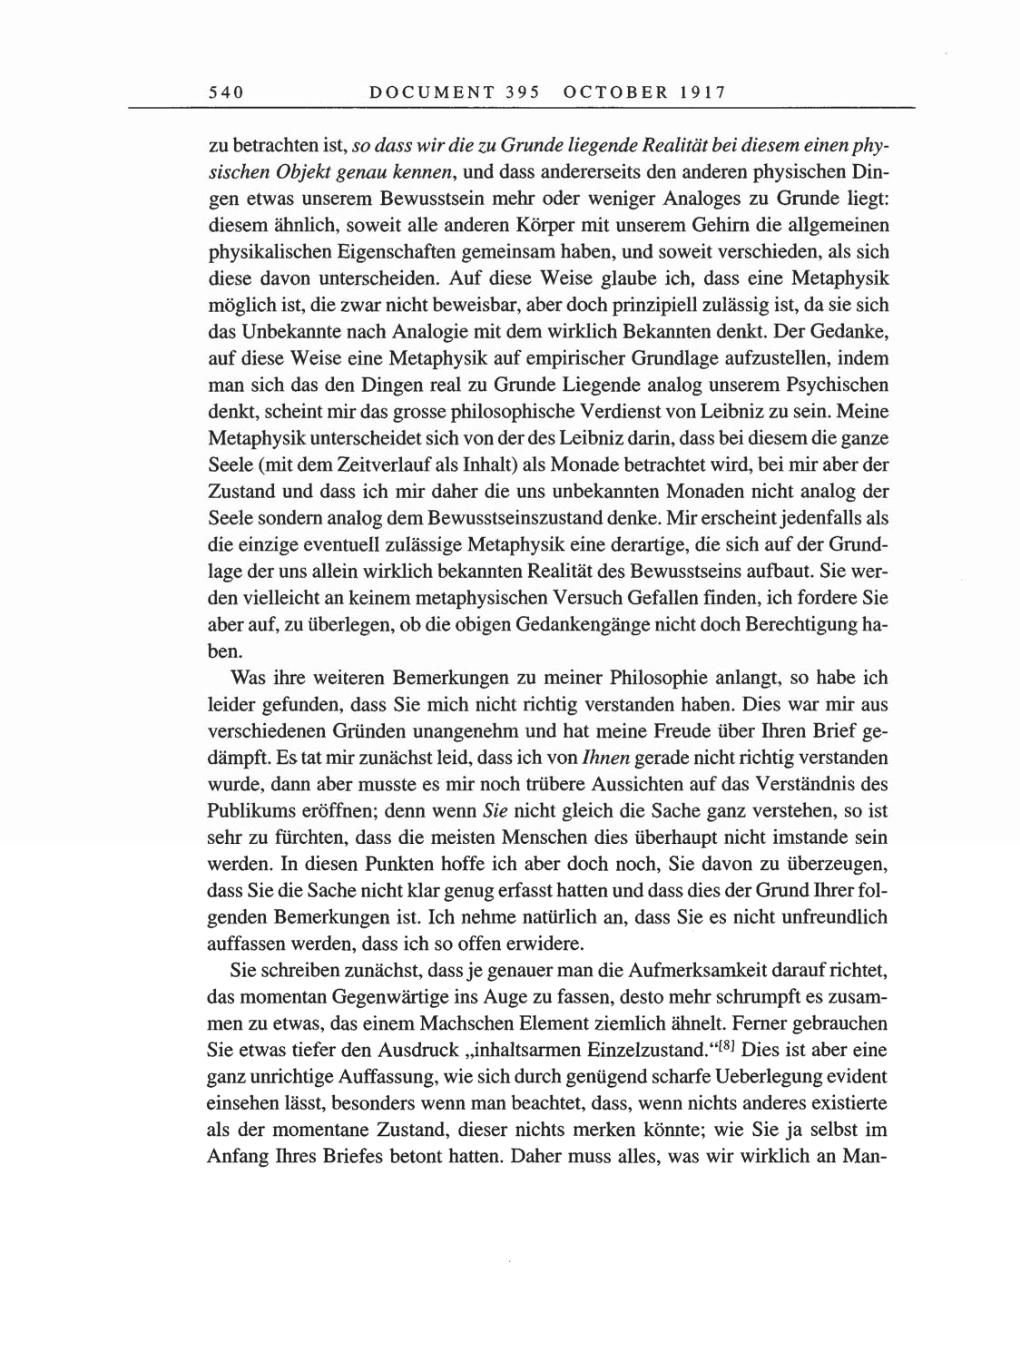 Volume 8, Part A: The Berlin Years: Correspondence 1914-1917 page 540